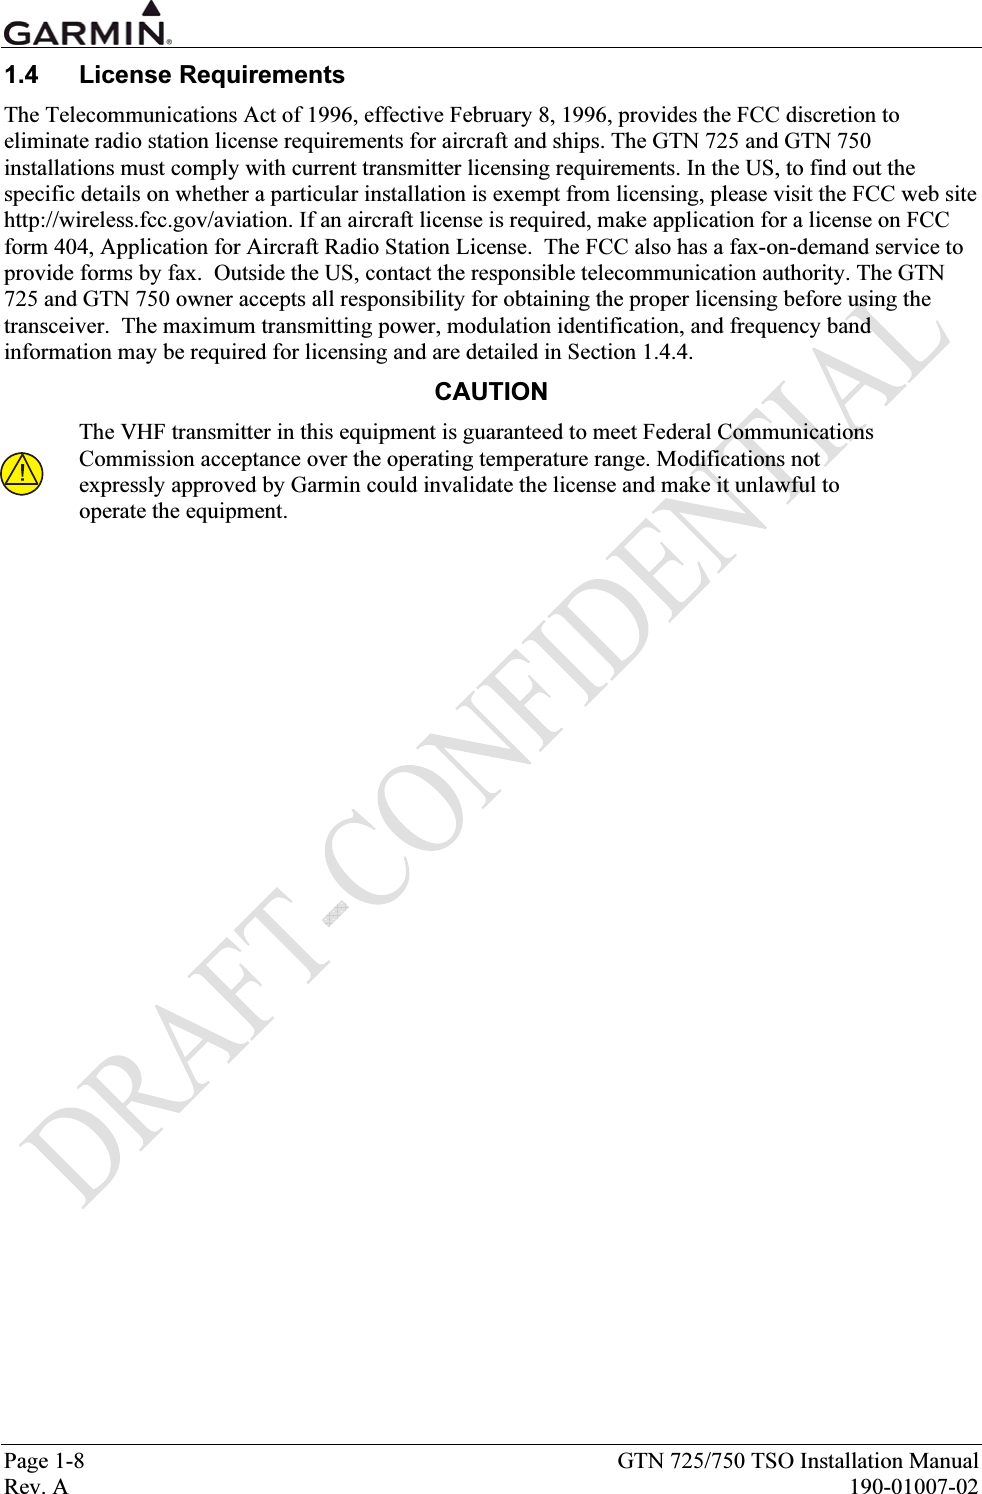  Page 1-8  GTN 725/750 TSO Installation Manual Rev. A  190-01007-02 1.4 License Requirements The Telecommunications Act of 1996, effective February 8, 1996, provides the FCC discretion to eliminate radio station license requirements for aircraft and ships. The GTN 725 and GTN 750 installations must comply with current transmitter licensing requirements. In the US, to find out the specific details on whether a particular installation is exempt from licensing, please visit the FCC web site http://wireless.fcc.gov/aviation. If an aircraft license is required, make application for a license on FCC form 404, Application for Aircraft Radio Station License.  The FCC also has a fax-on-demand service to provide forms by fax.  Outside the US, contact the responsible telecommunication authority. The GTN 725 and GTN 750 owner accepts all responsibility for obtaining the proper licensing before using the transceiver.  The maximum transmitting power, modulation identification, and frequency band information may be required for licensing and are detailed in Section 1.4.4. CAUTION The VHF transmitter in this equipment is guaranteed to meet Federal Communications Commission acceptance over the operating temperature range. Modifications not expressly approved by Garmin could invalidate the license and make it unlawful to operate the equipment. 